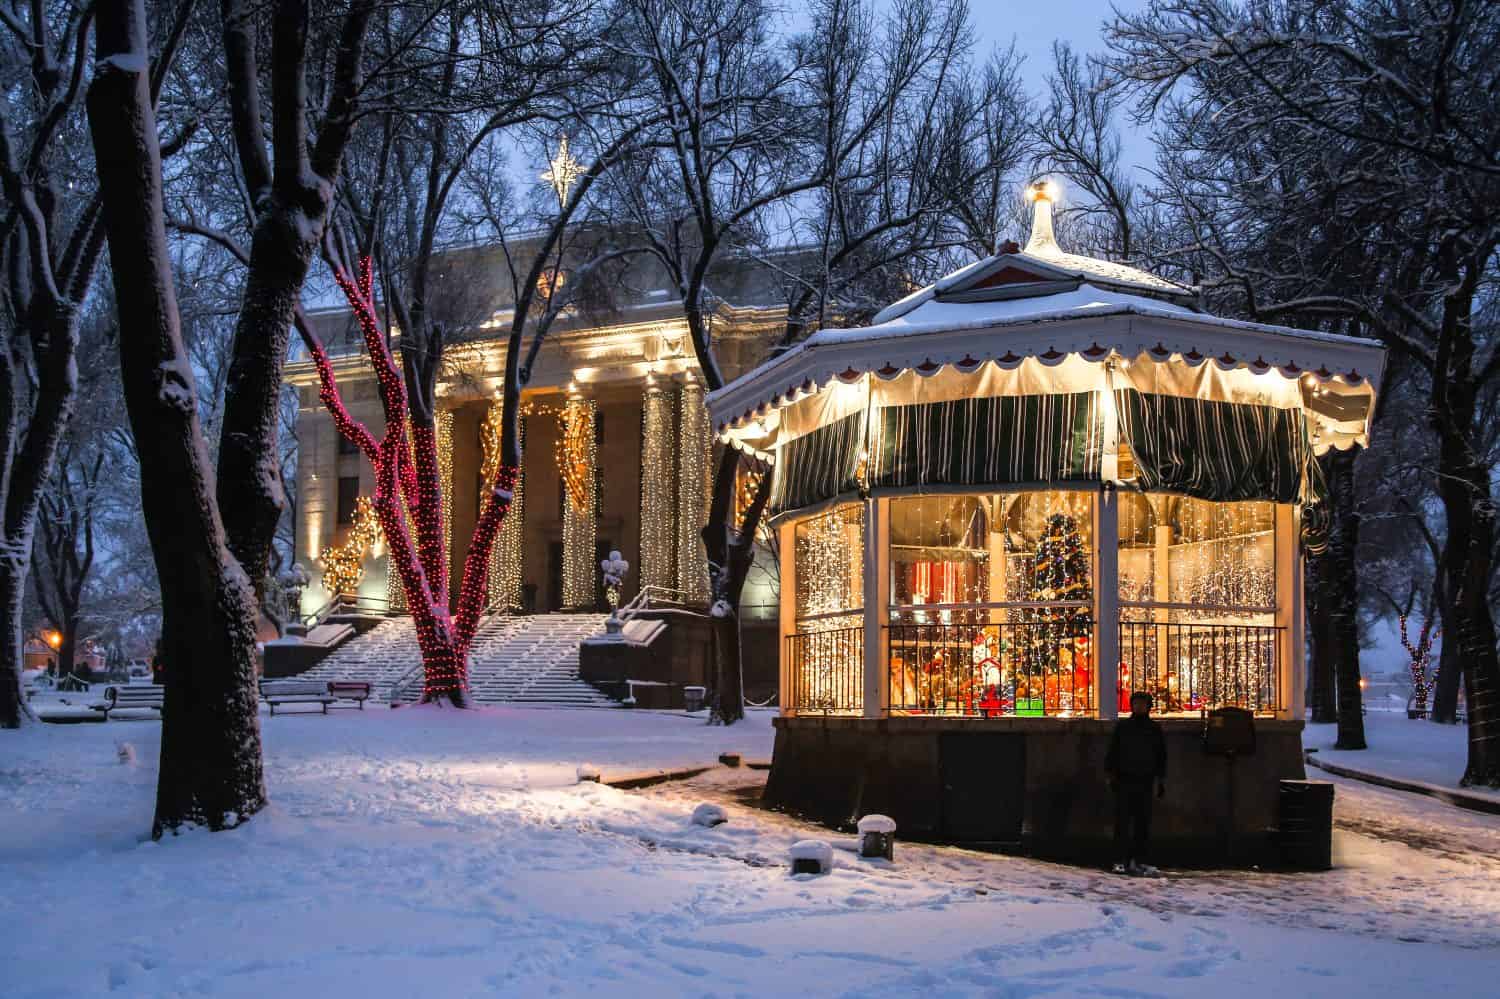 Holiday lights in the fresh snow around decorated gazebo at the Yavapai County Courthouse in Prescott, Arizona